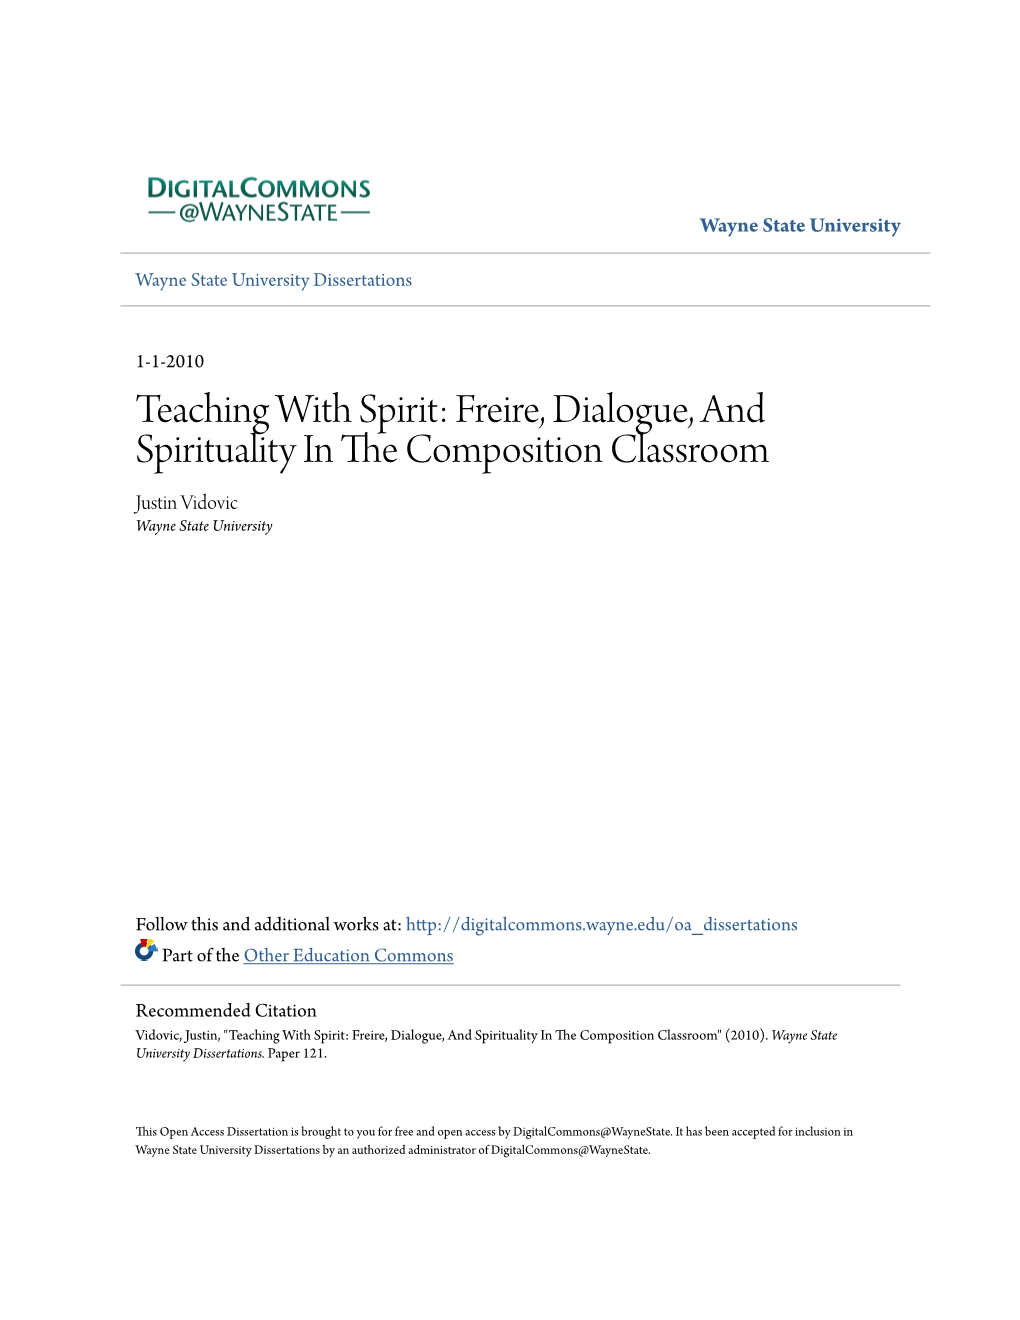 Freire, Dialogue, and Spirituality in the Composition Classroom